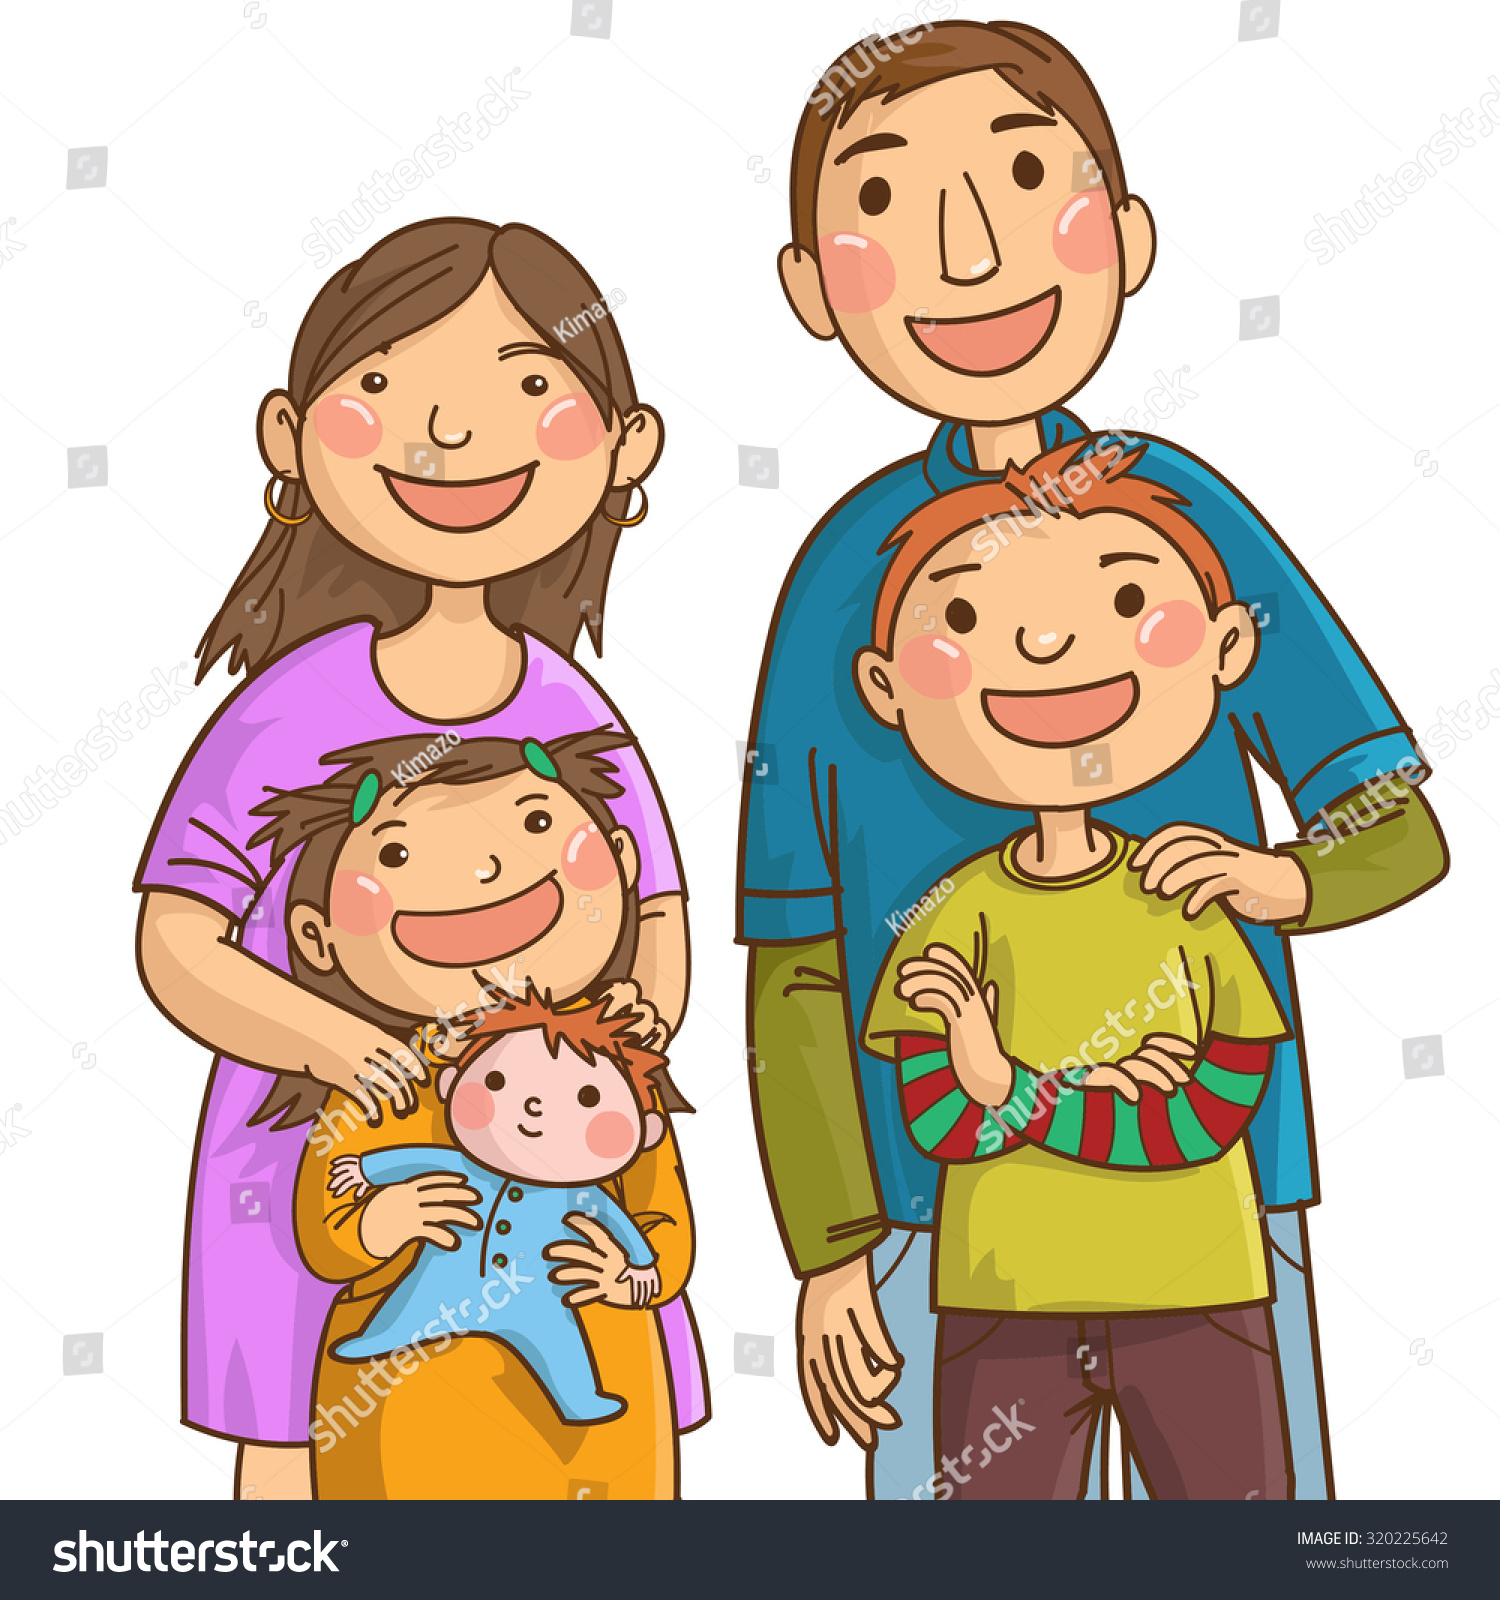 mom and dad clipart - photo #46